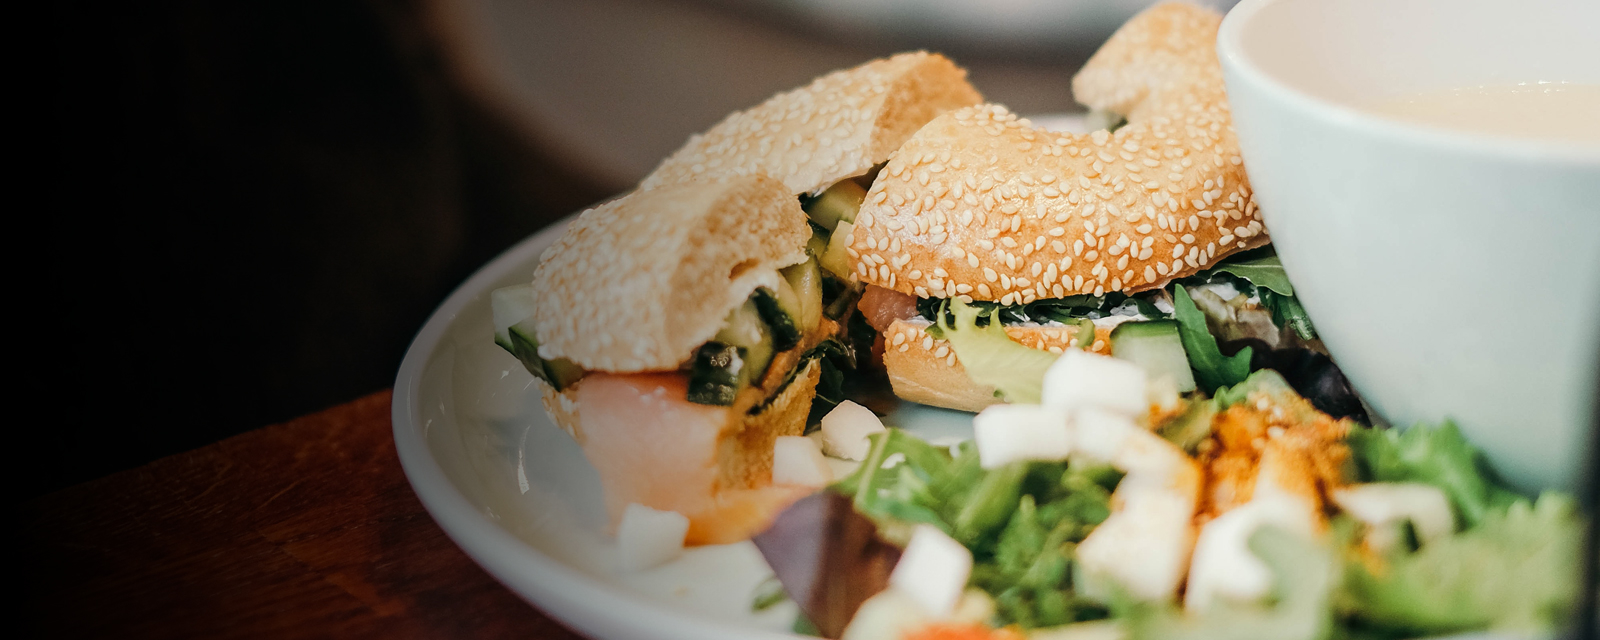 bagel-with-salad